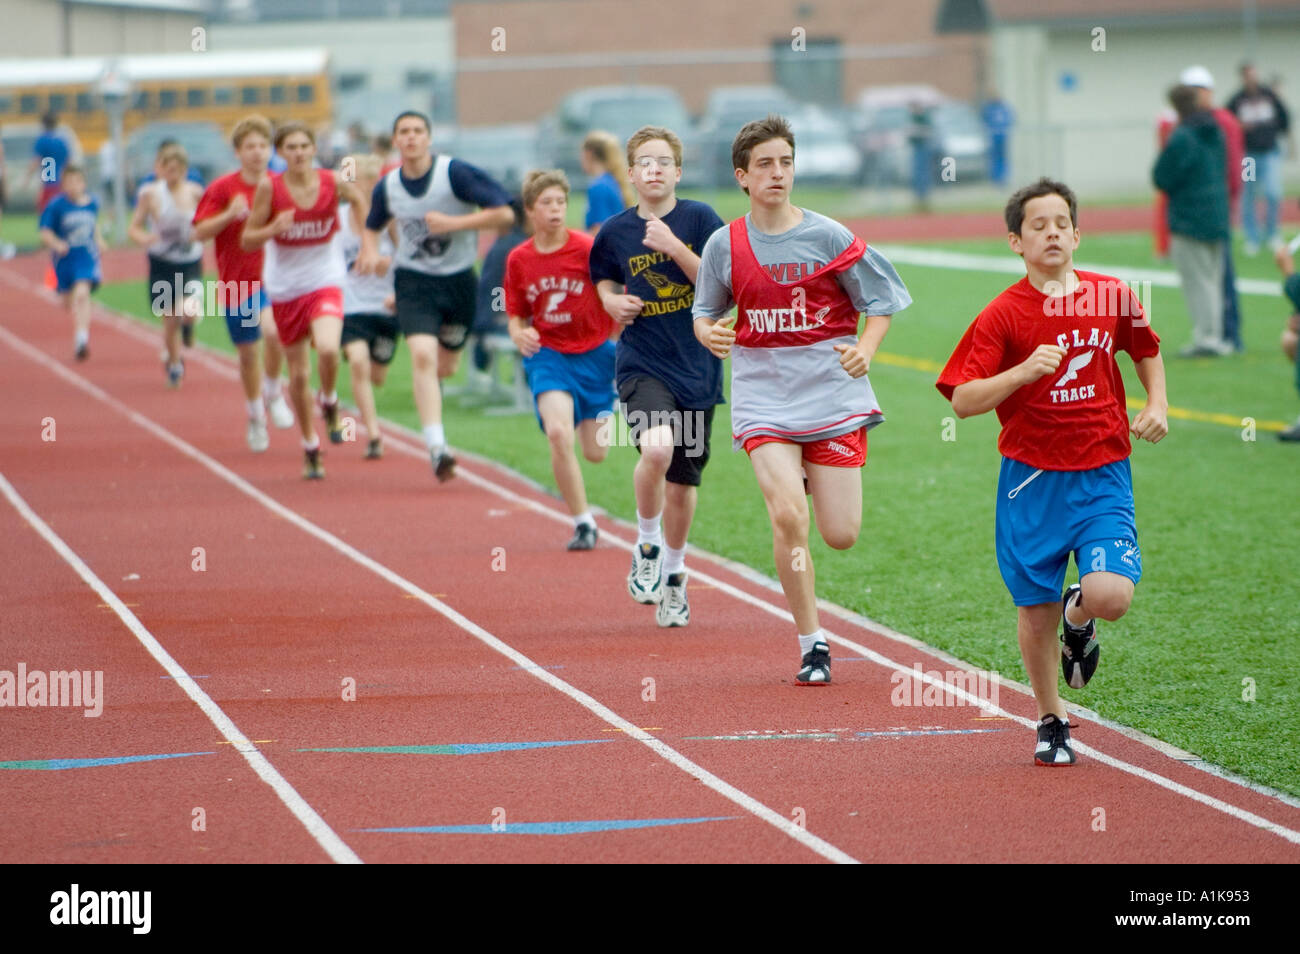 Middle school ages teens participate in track and field events Stock